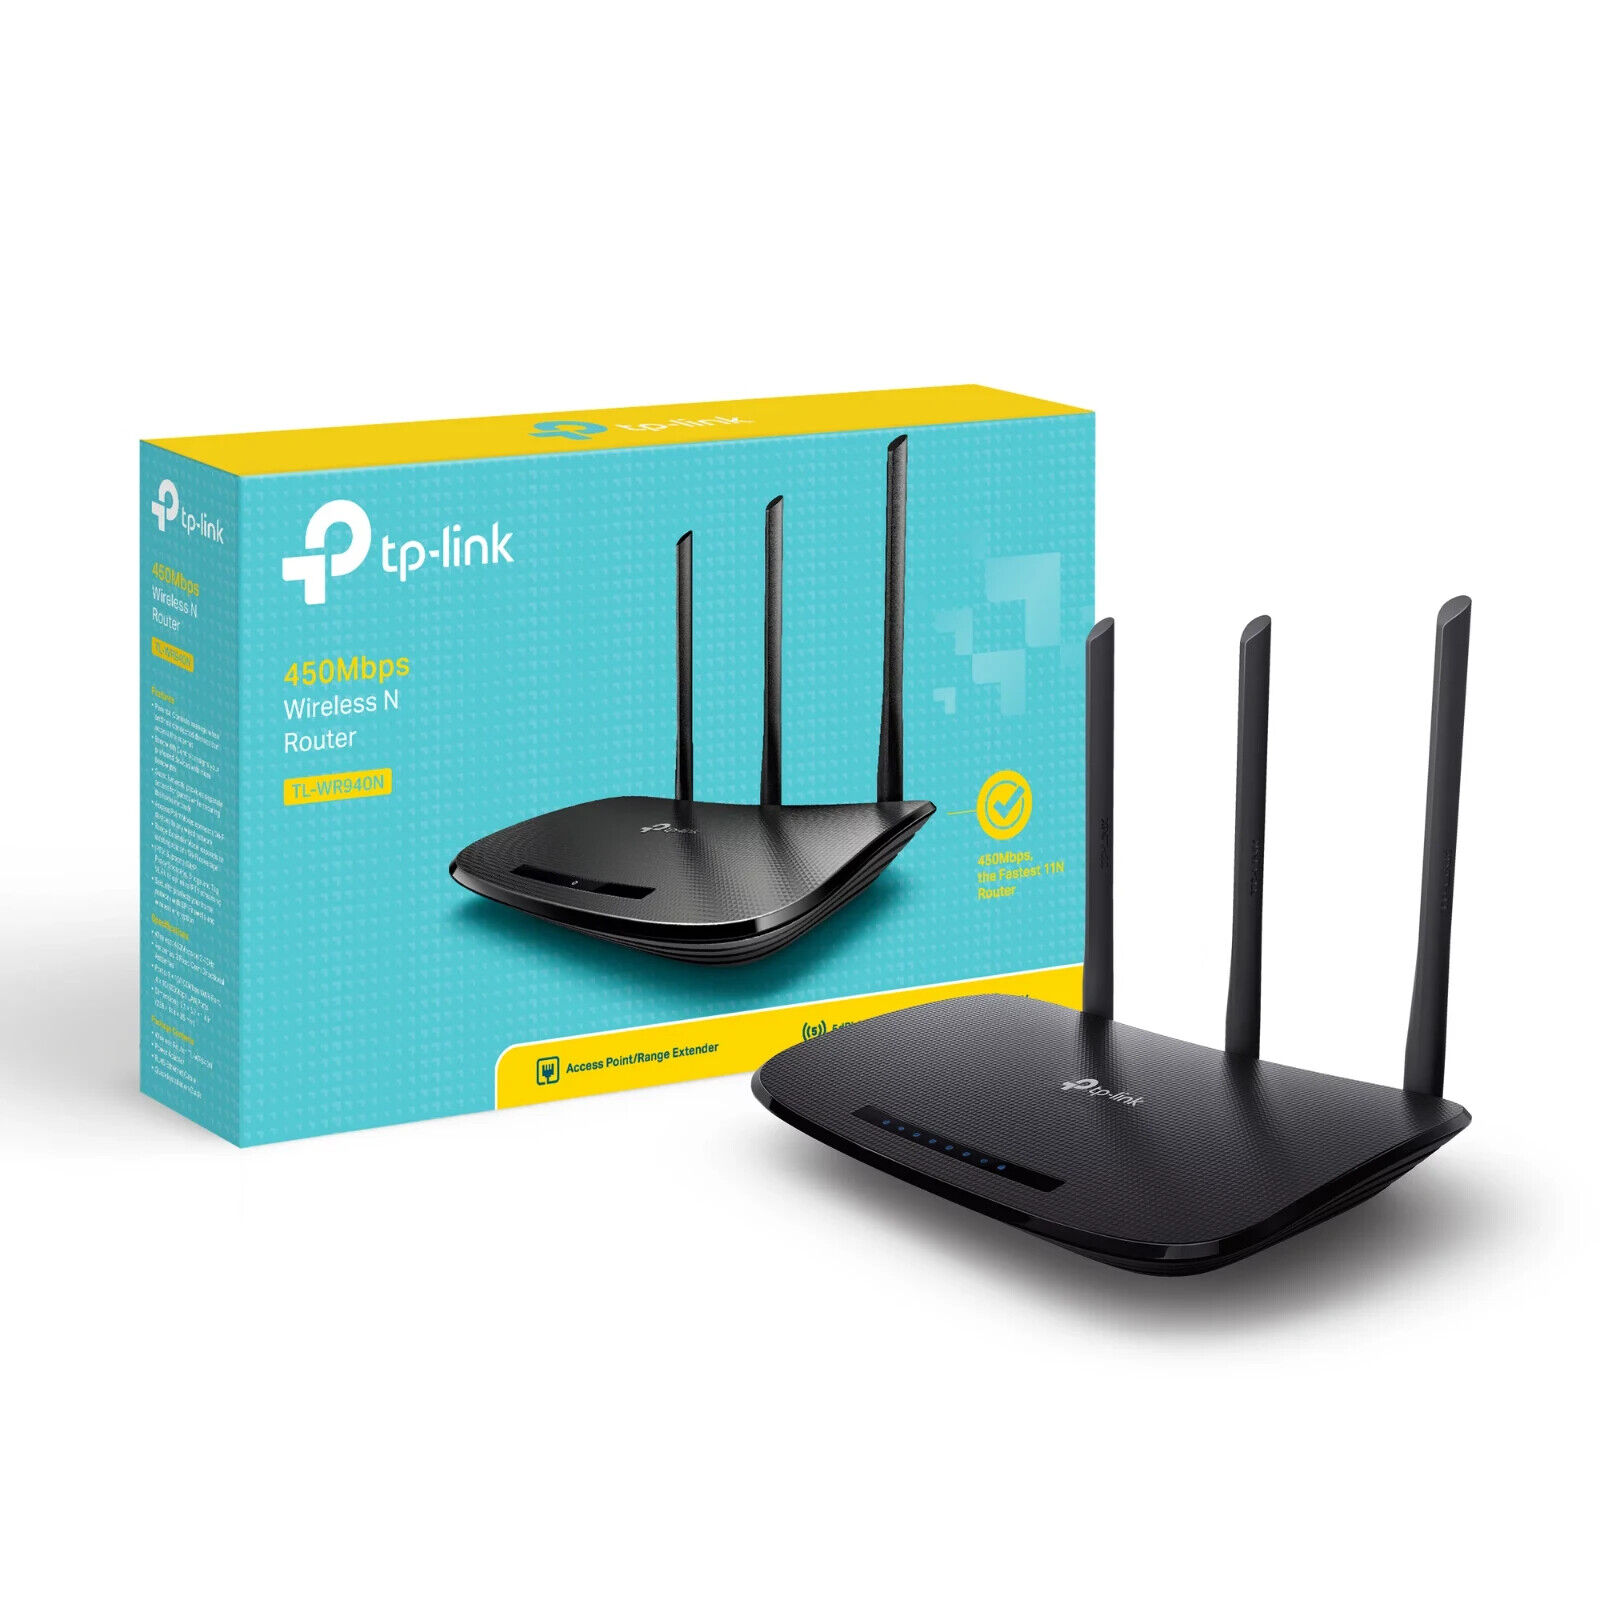 TP-Link 450 Mbps TL-WR940N Wireless N Router/Access Point/Range Extender - Black